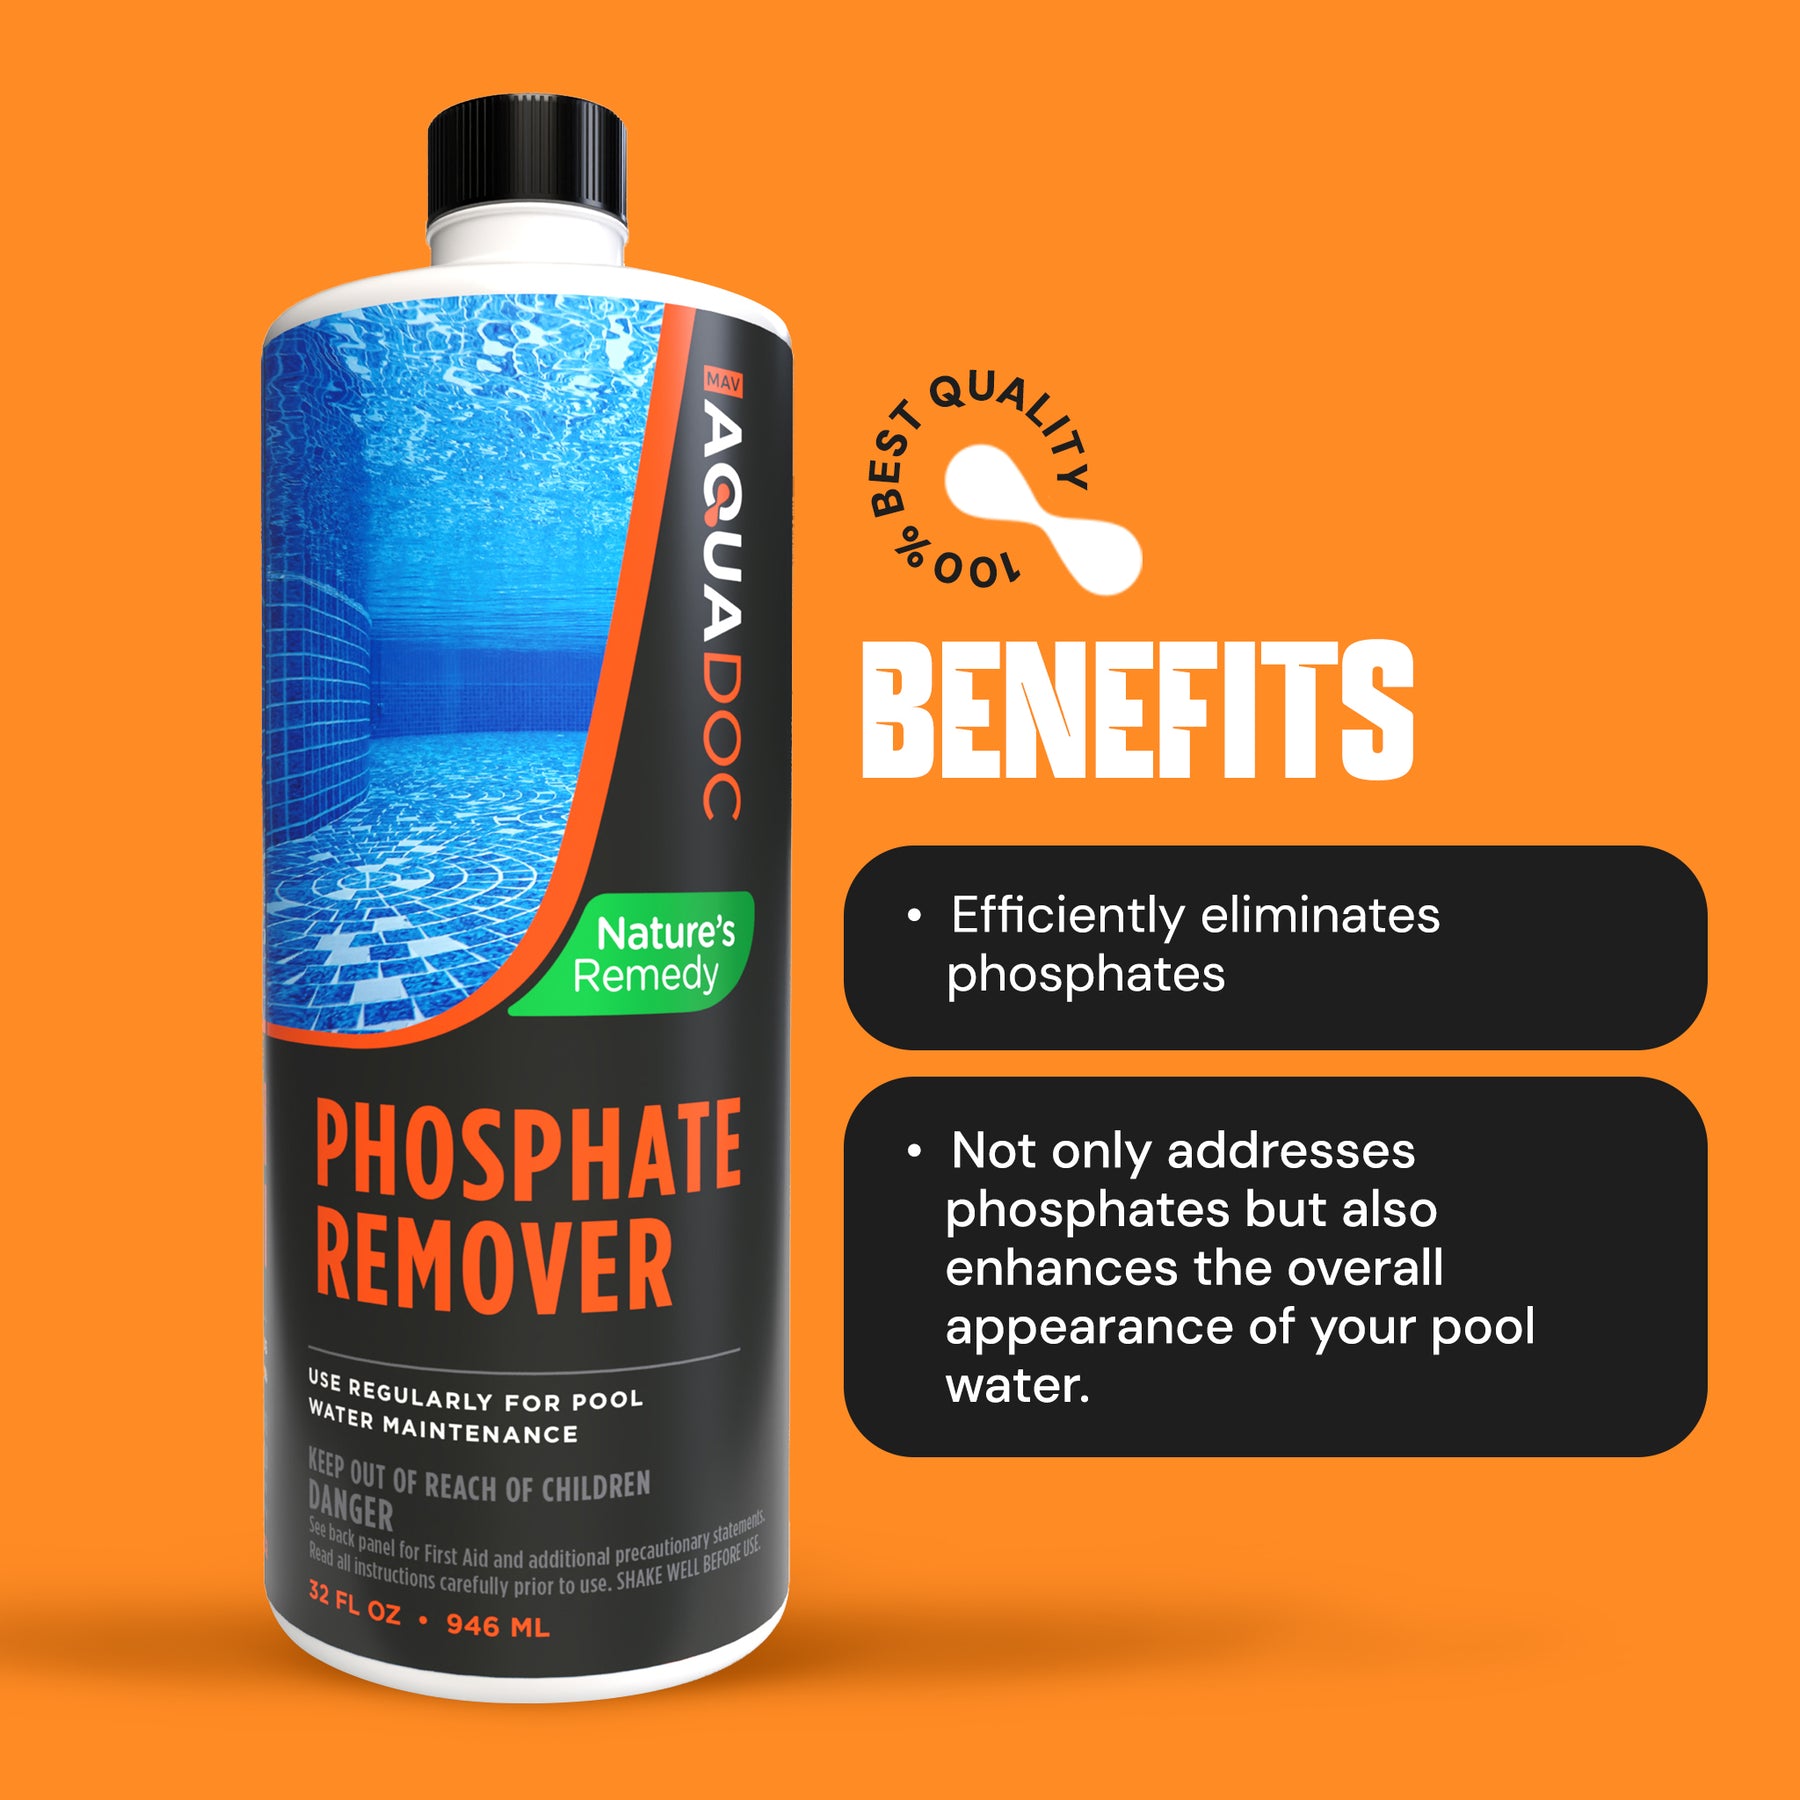 Say Goodbye to Unwanted Organisms with AquaDoc's Phosphate Remover